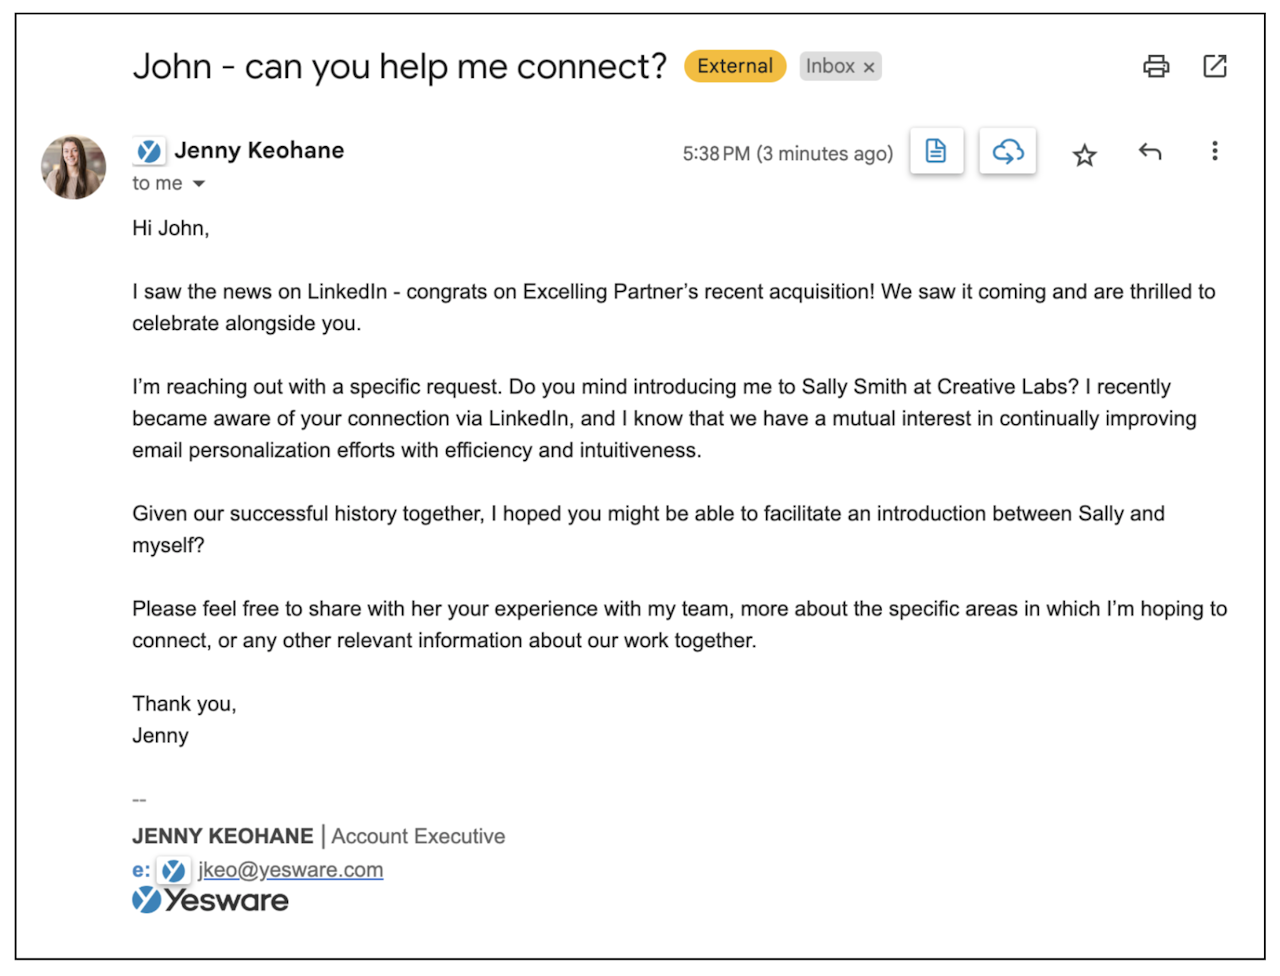 How to write an introduction email request to a client